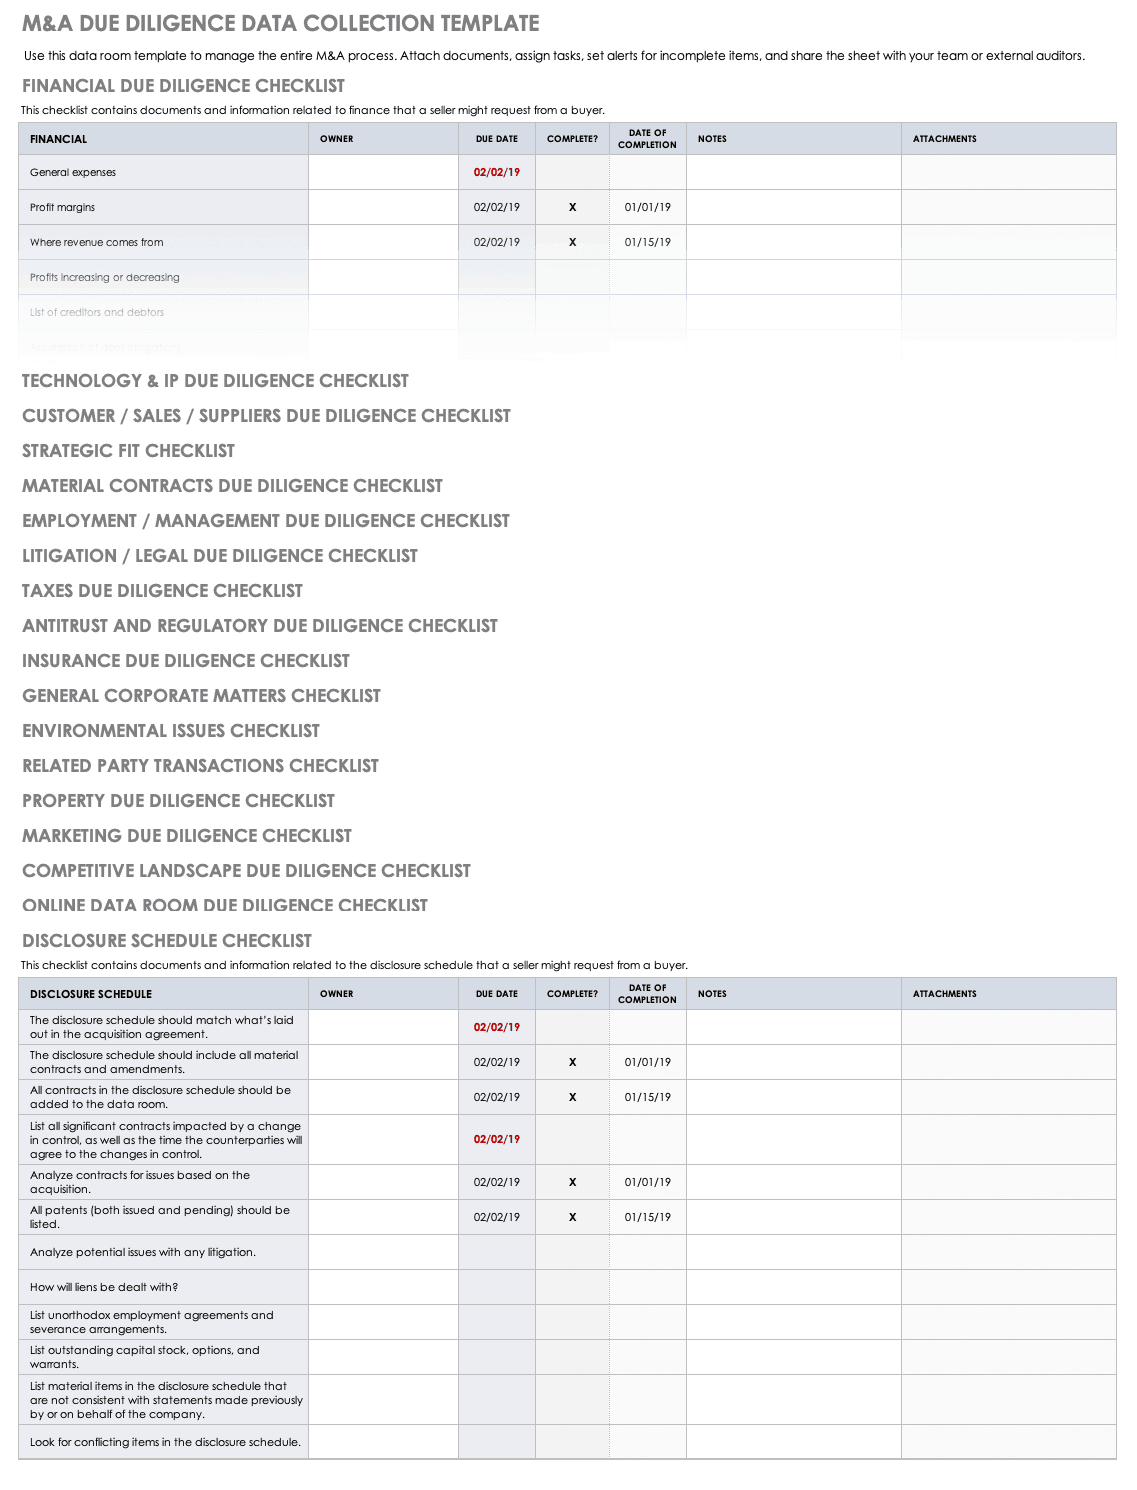 Free Due Diligence Templates And Checklists | Smartsheet Pertaining To Vendor Due Diligence Report Template